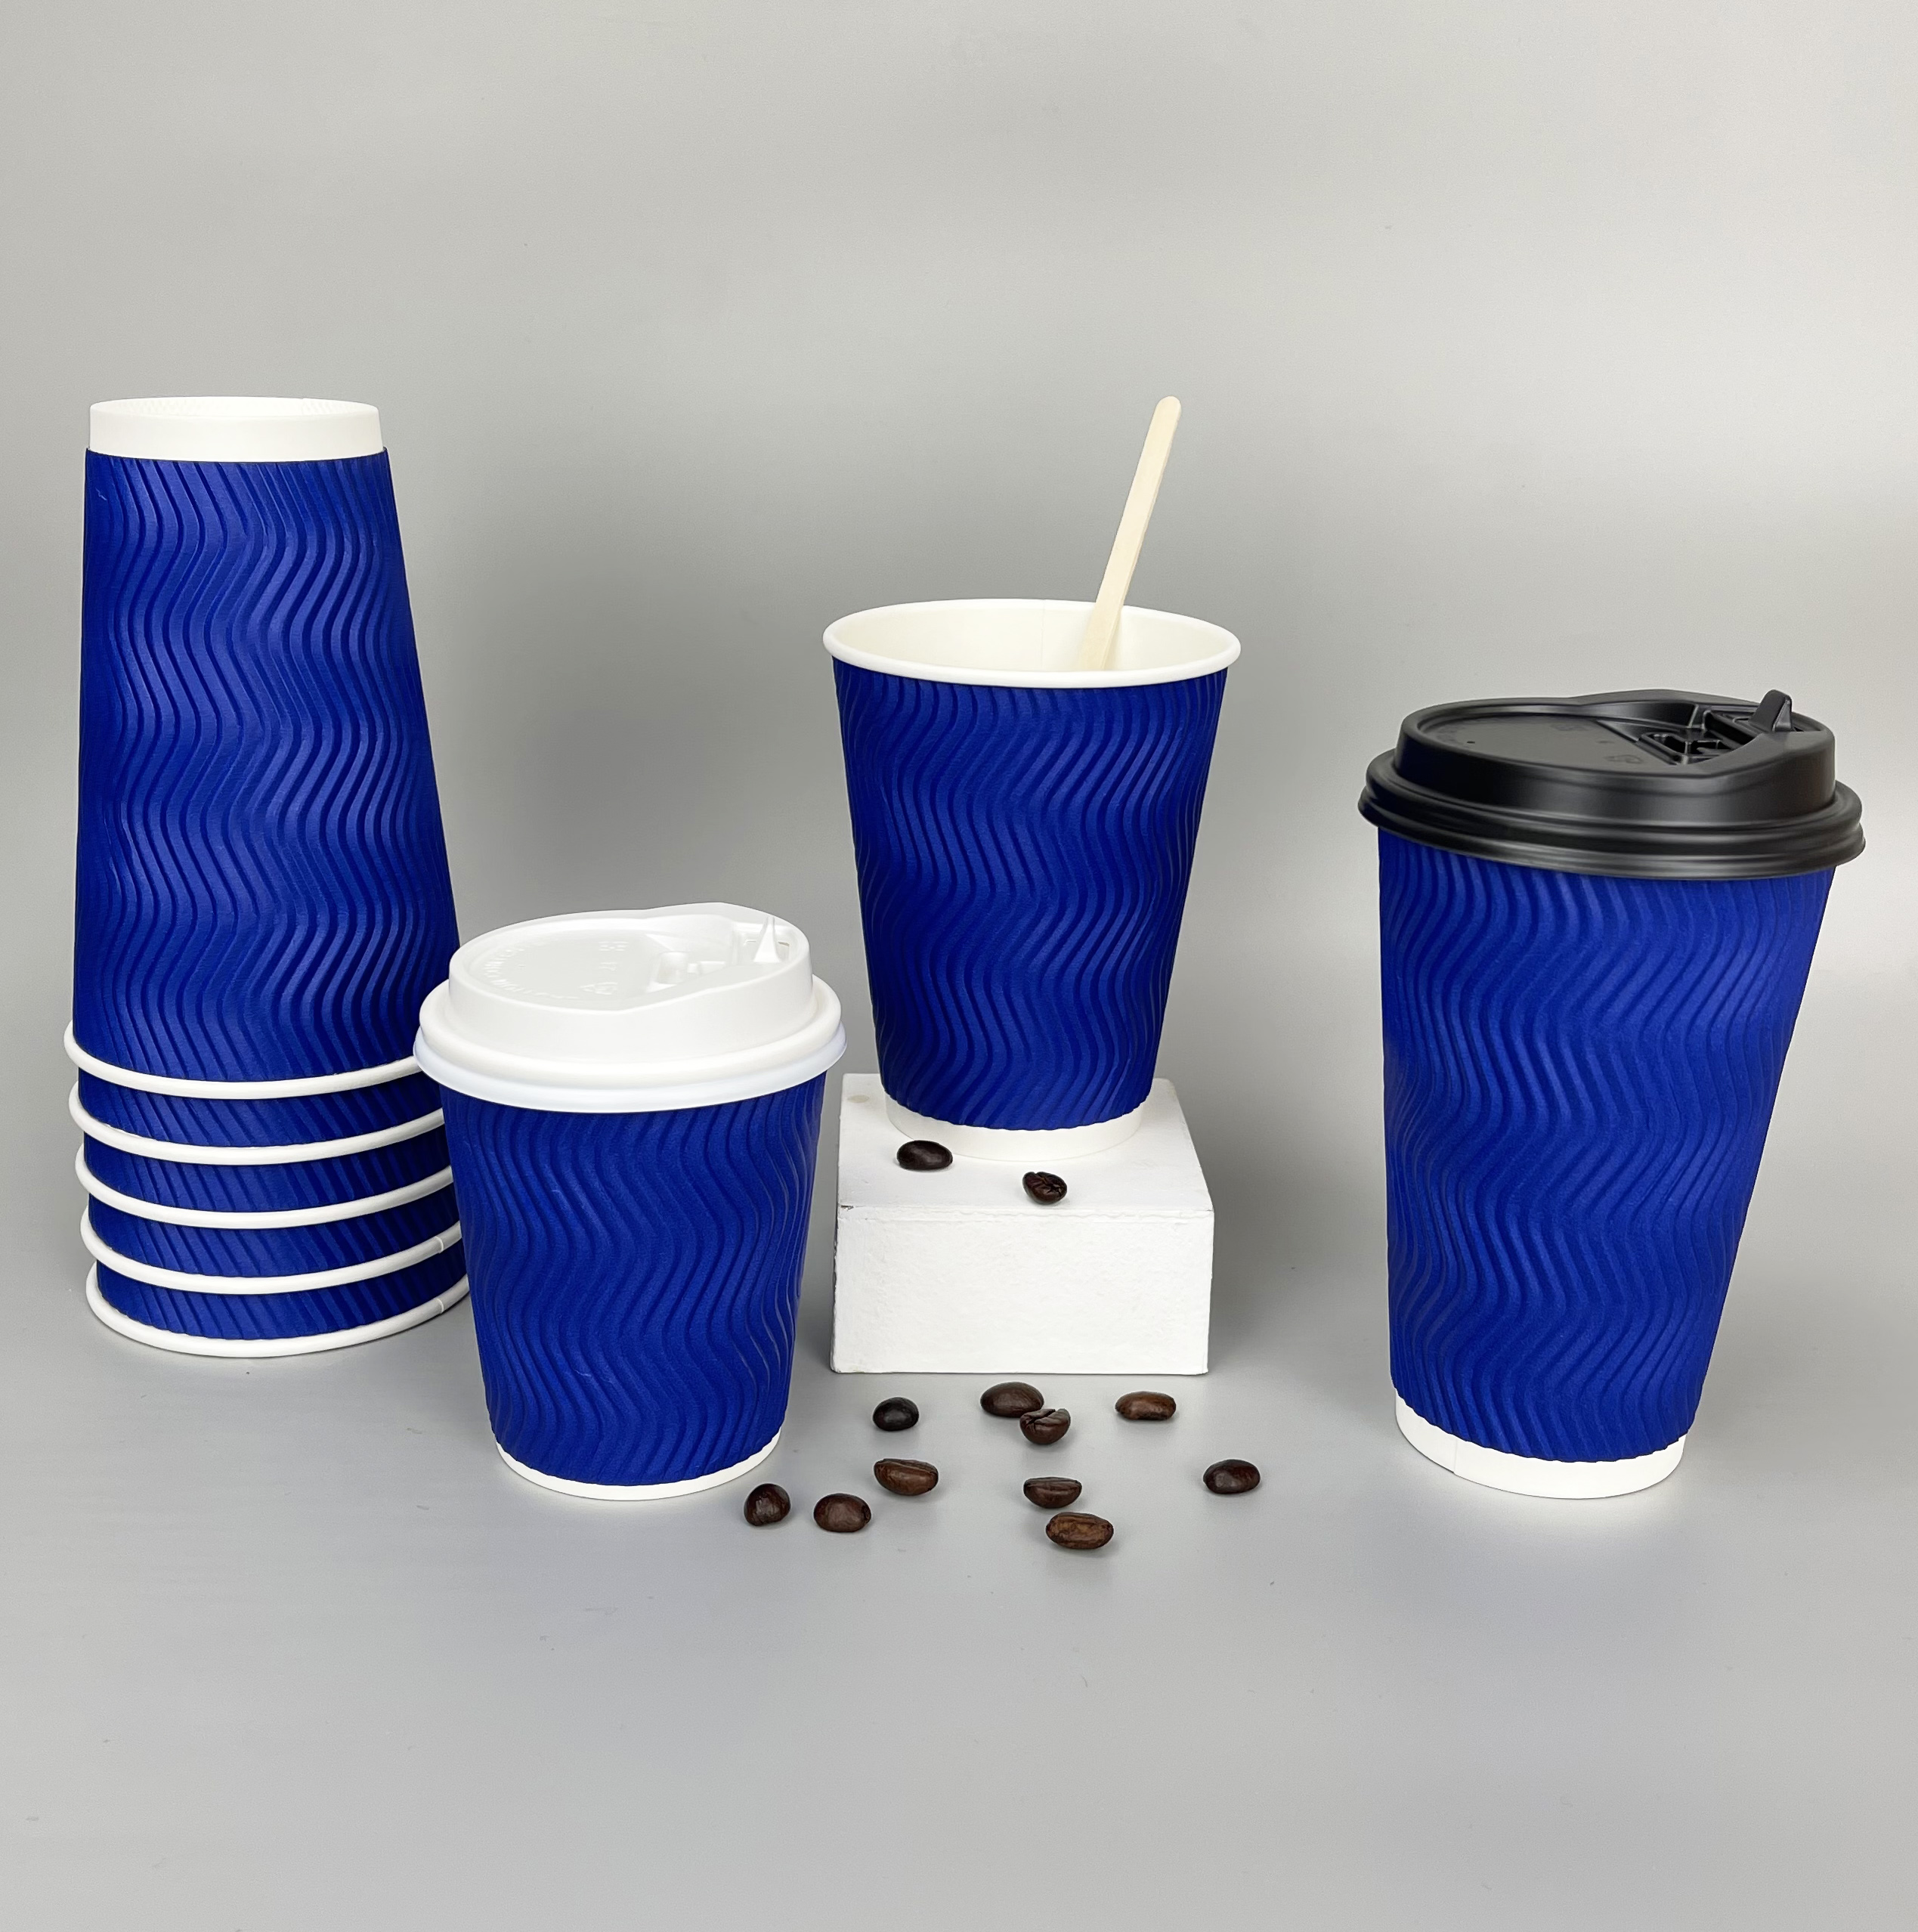 100pcs/pack 50ml Small Paper Cups Taste Cup Disposable Paper Cup Party  Supplies